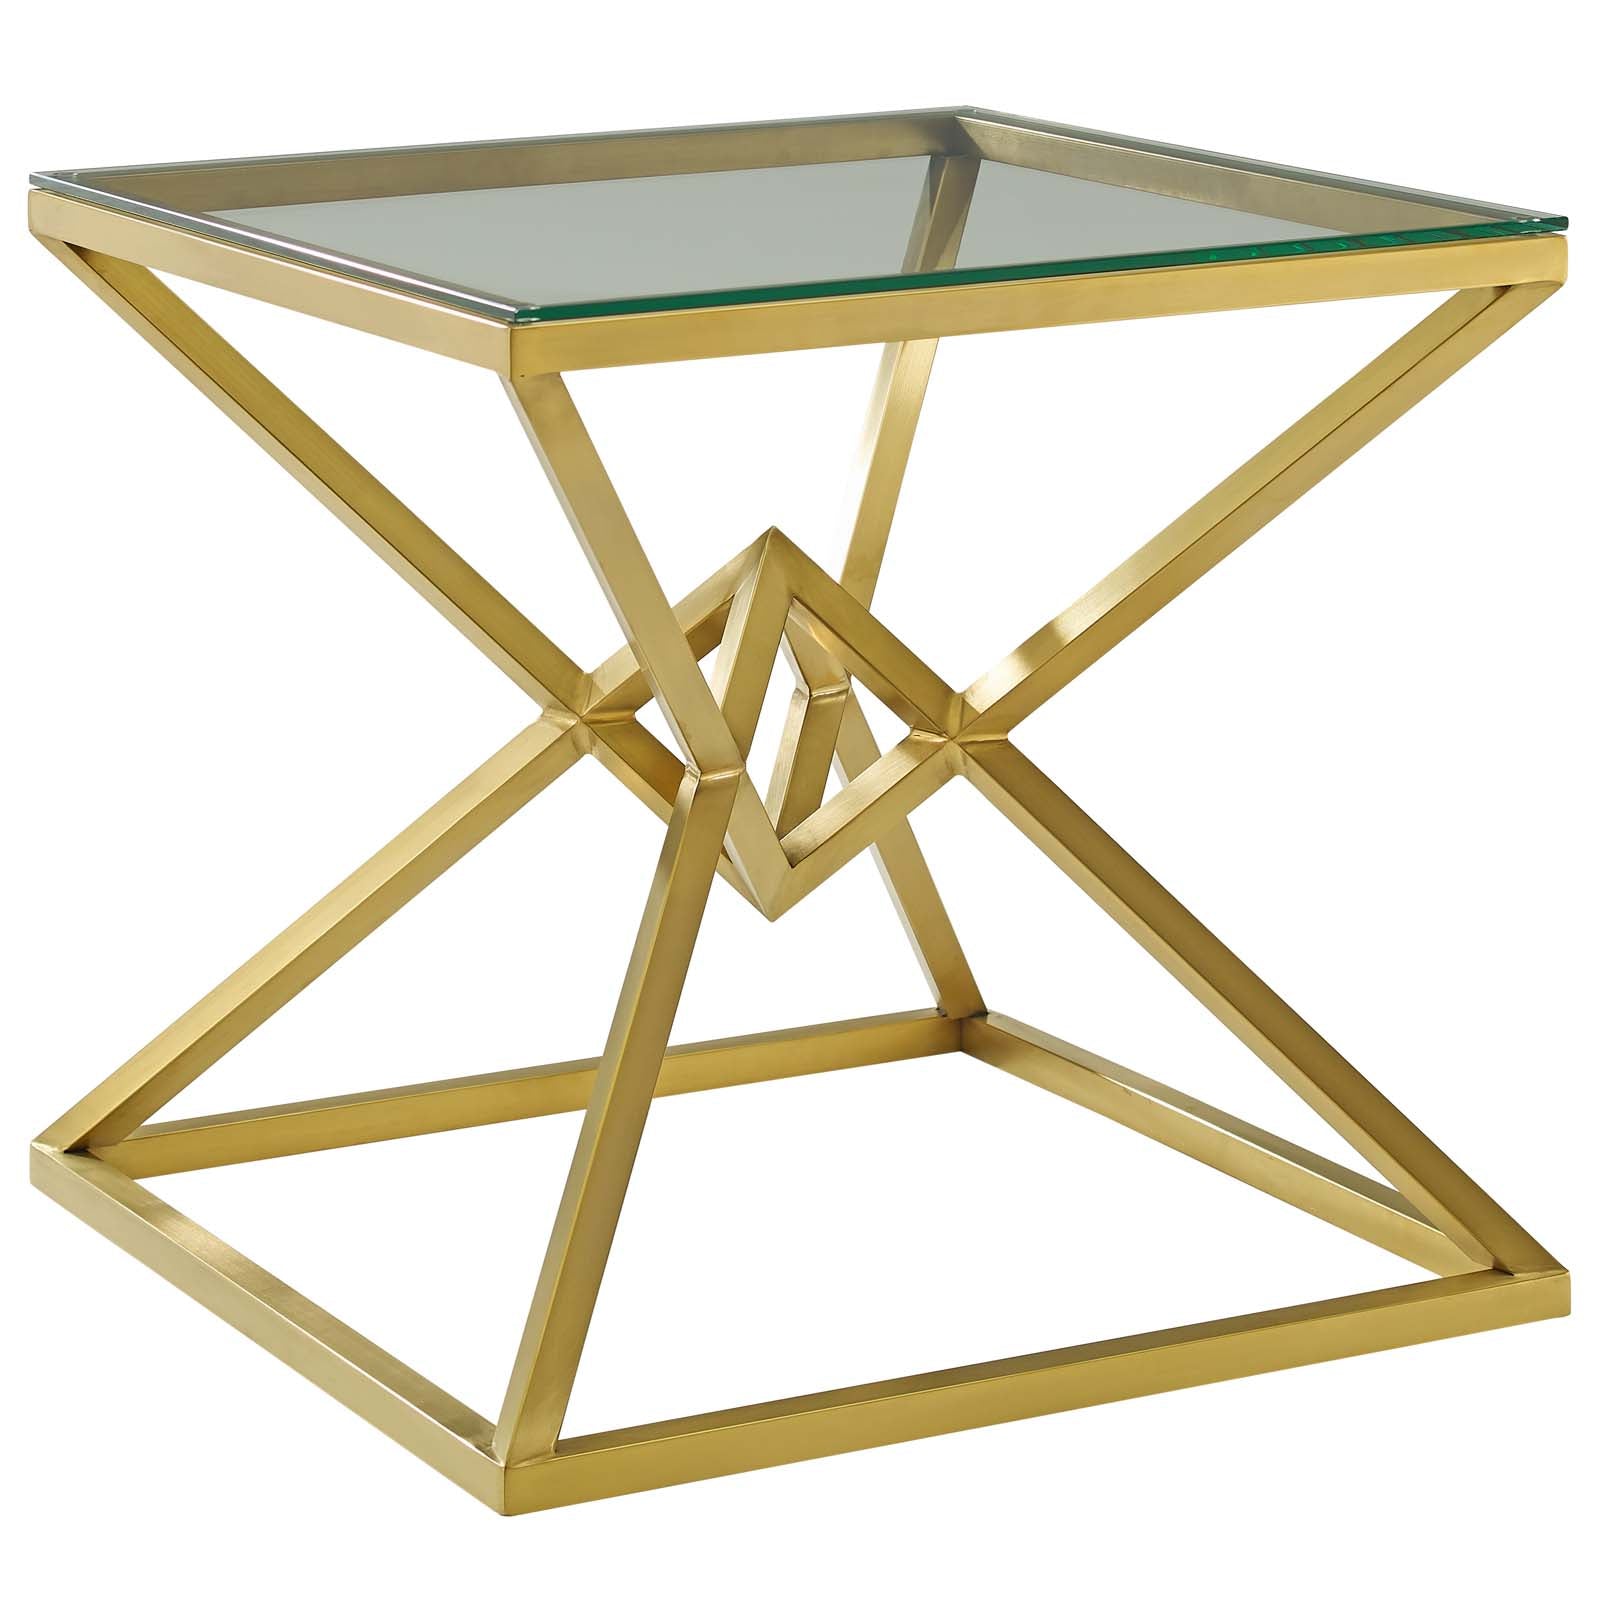 Point 25.5" Brushed Gold Metal Stainless Steel Side Table - East Shore Modern Home Furnishings